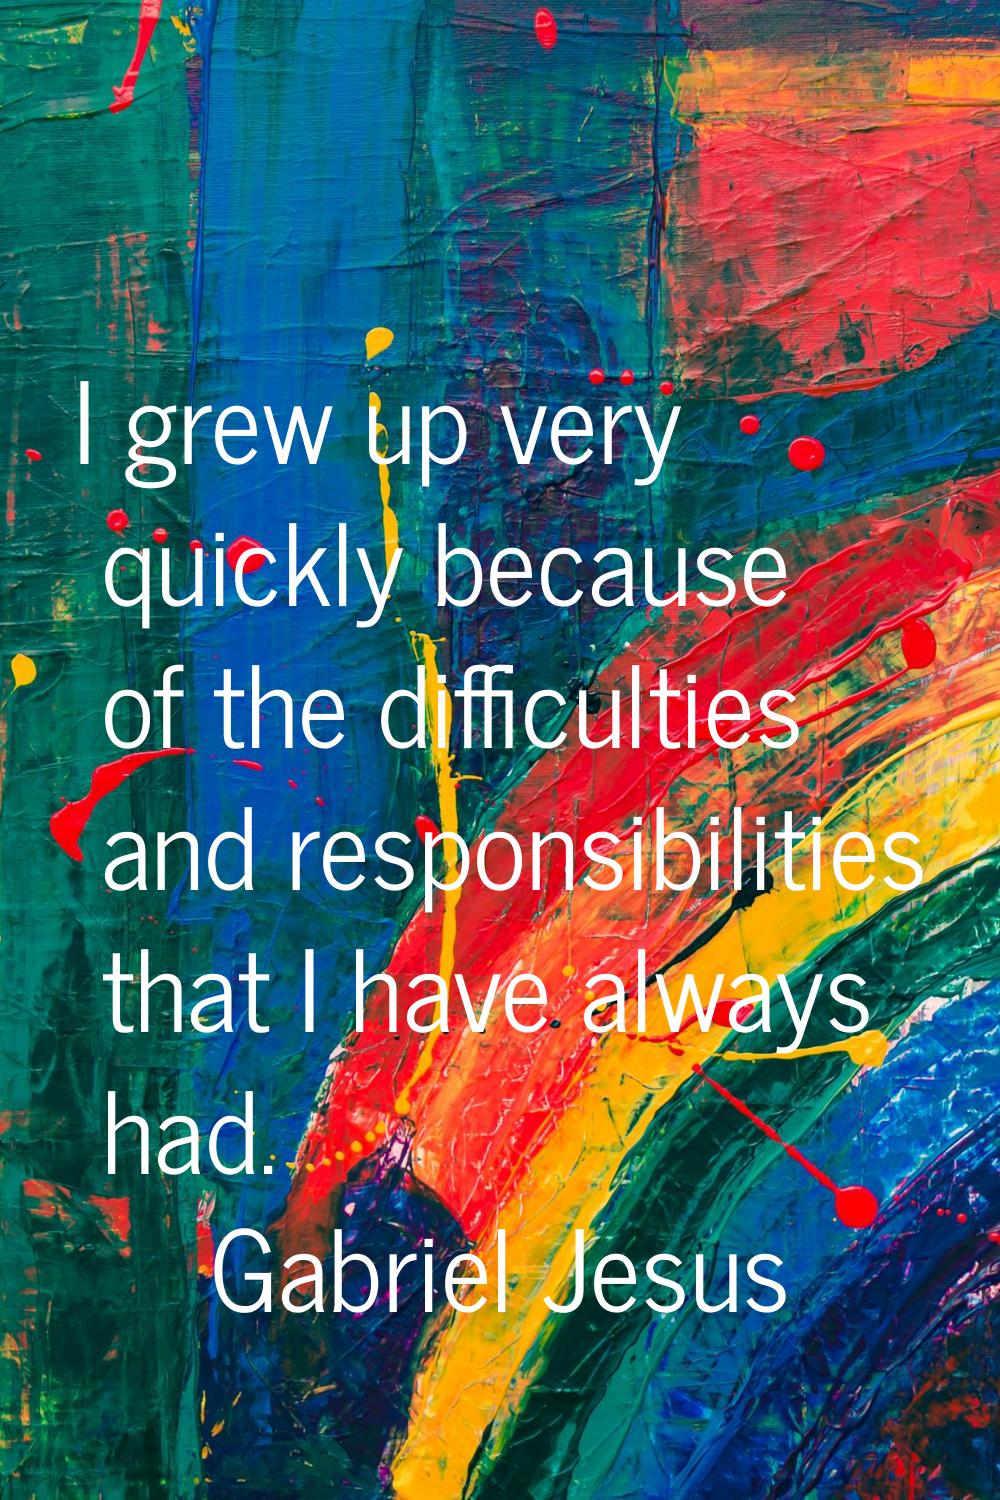 I grew up very quickly because of the difficulties and responsibilities that I have always had.